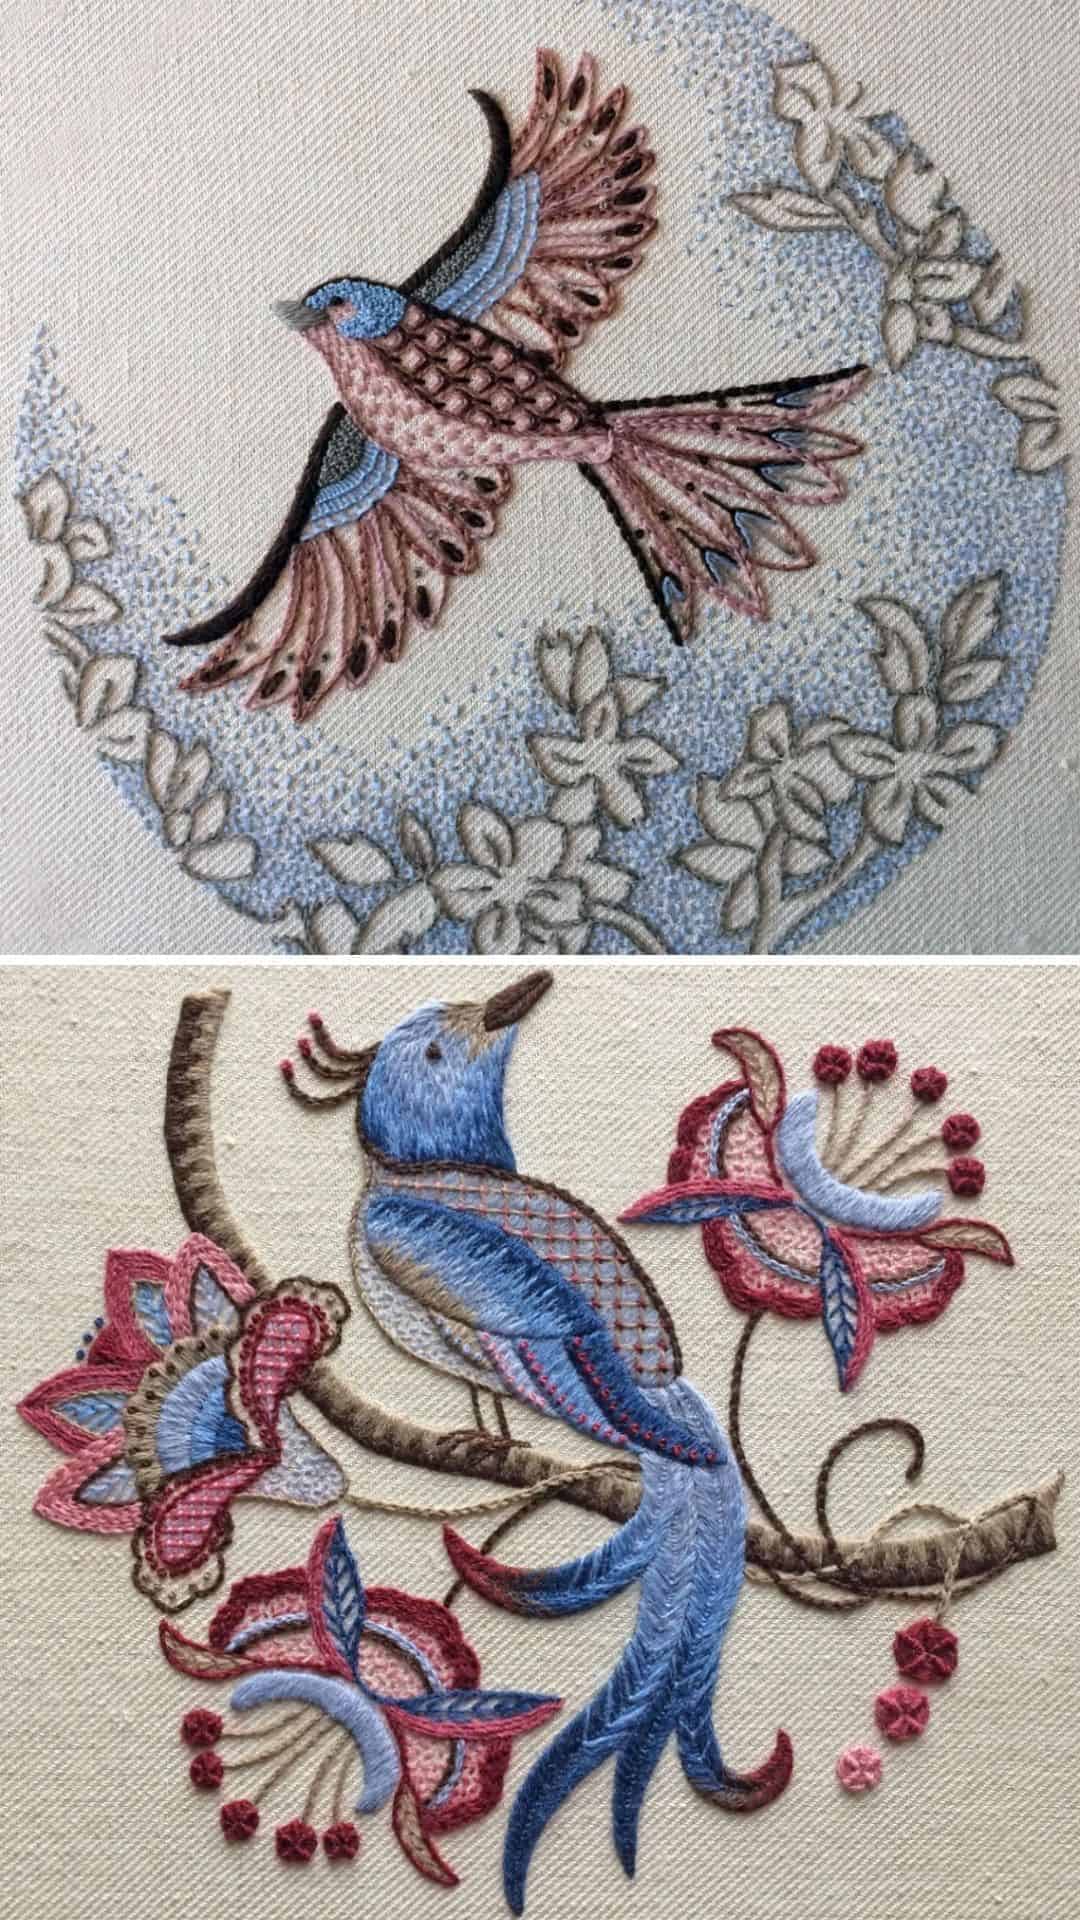 Bluebird embroidery co crewel work kits including a beautiful bird of paradise and chaffinch available to buy along with other beautiful crewel work patterns and kits I've shared on the blog #crewel #embroidery #pattern #bluebird #birdofparadise #chaffinch